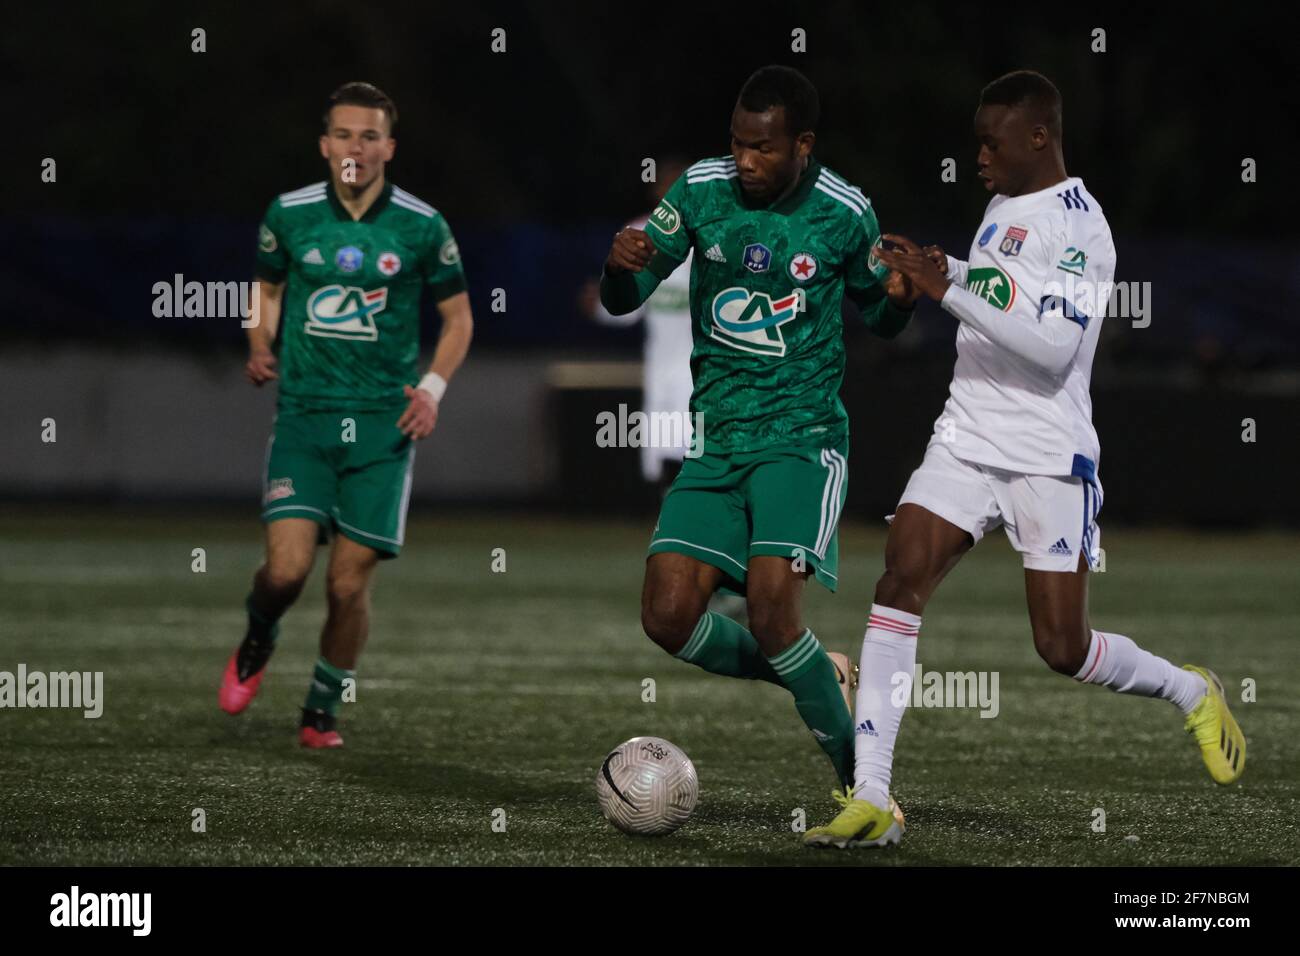 Saint Ouen, Seine Saint Denis, France. 9th Apr, 2021. Red Star Midfield PAPE MEISSA BA in action during the round of 16 soccer French Cup match between Red Star and Olympique Lyonnais at Bauer Stadium - Saint Ouen - France.Lyon Won 2:2 Credit: Pierre Stevenin/ZUMA Wire/Alamy Live News Stock Photo